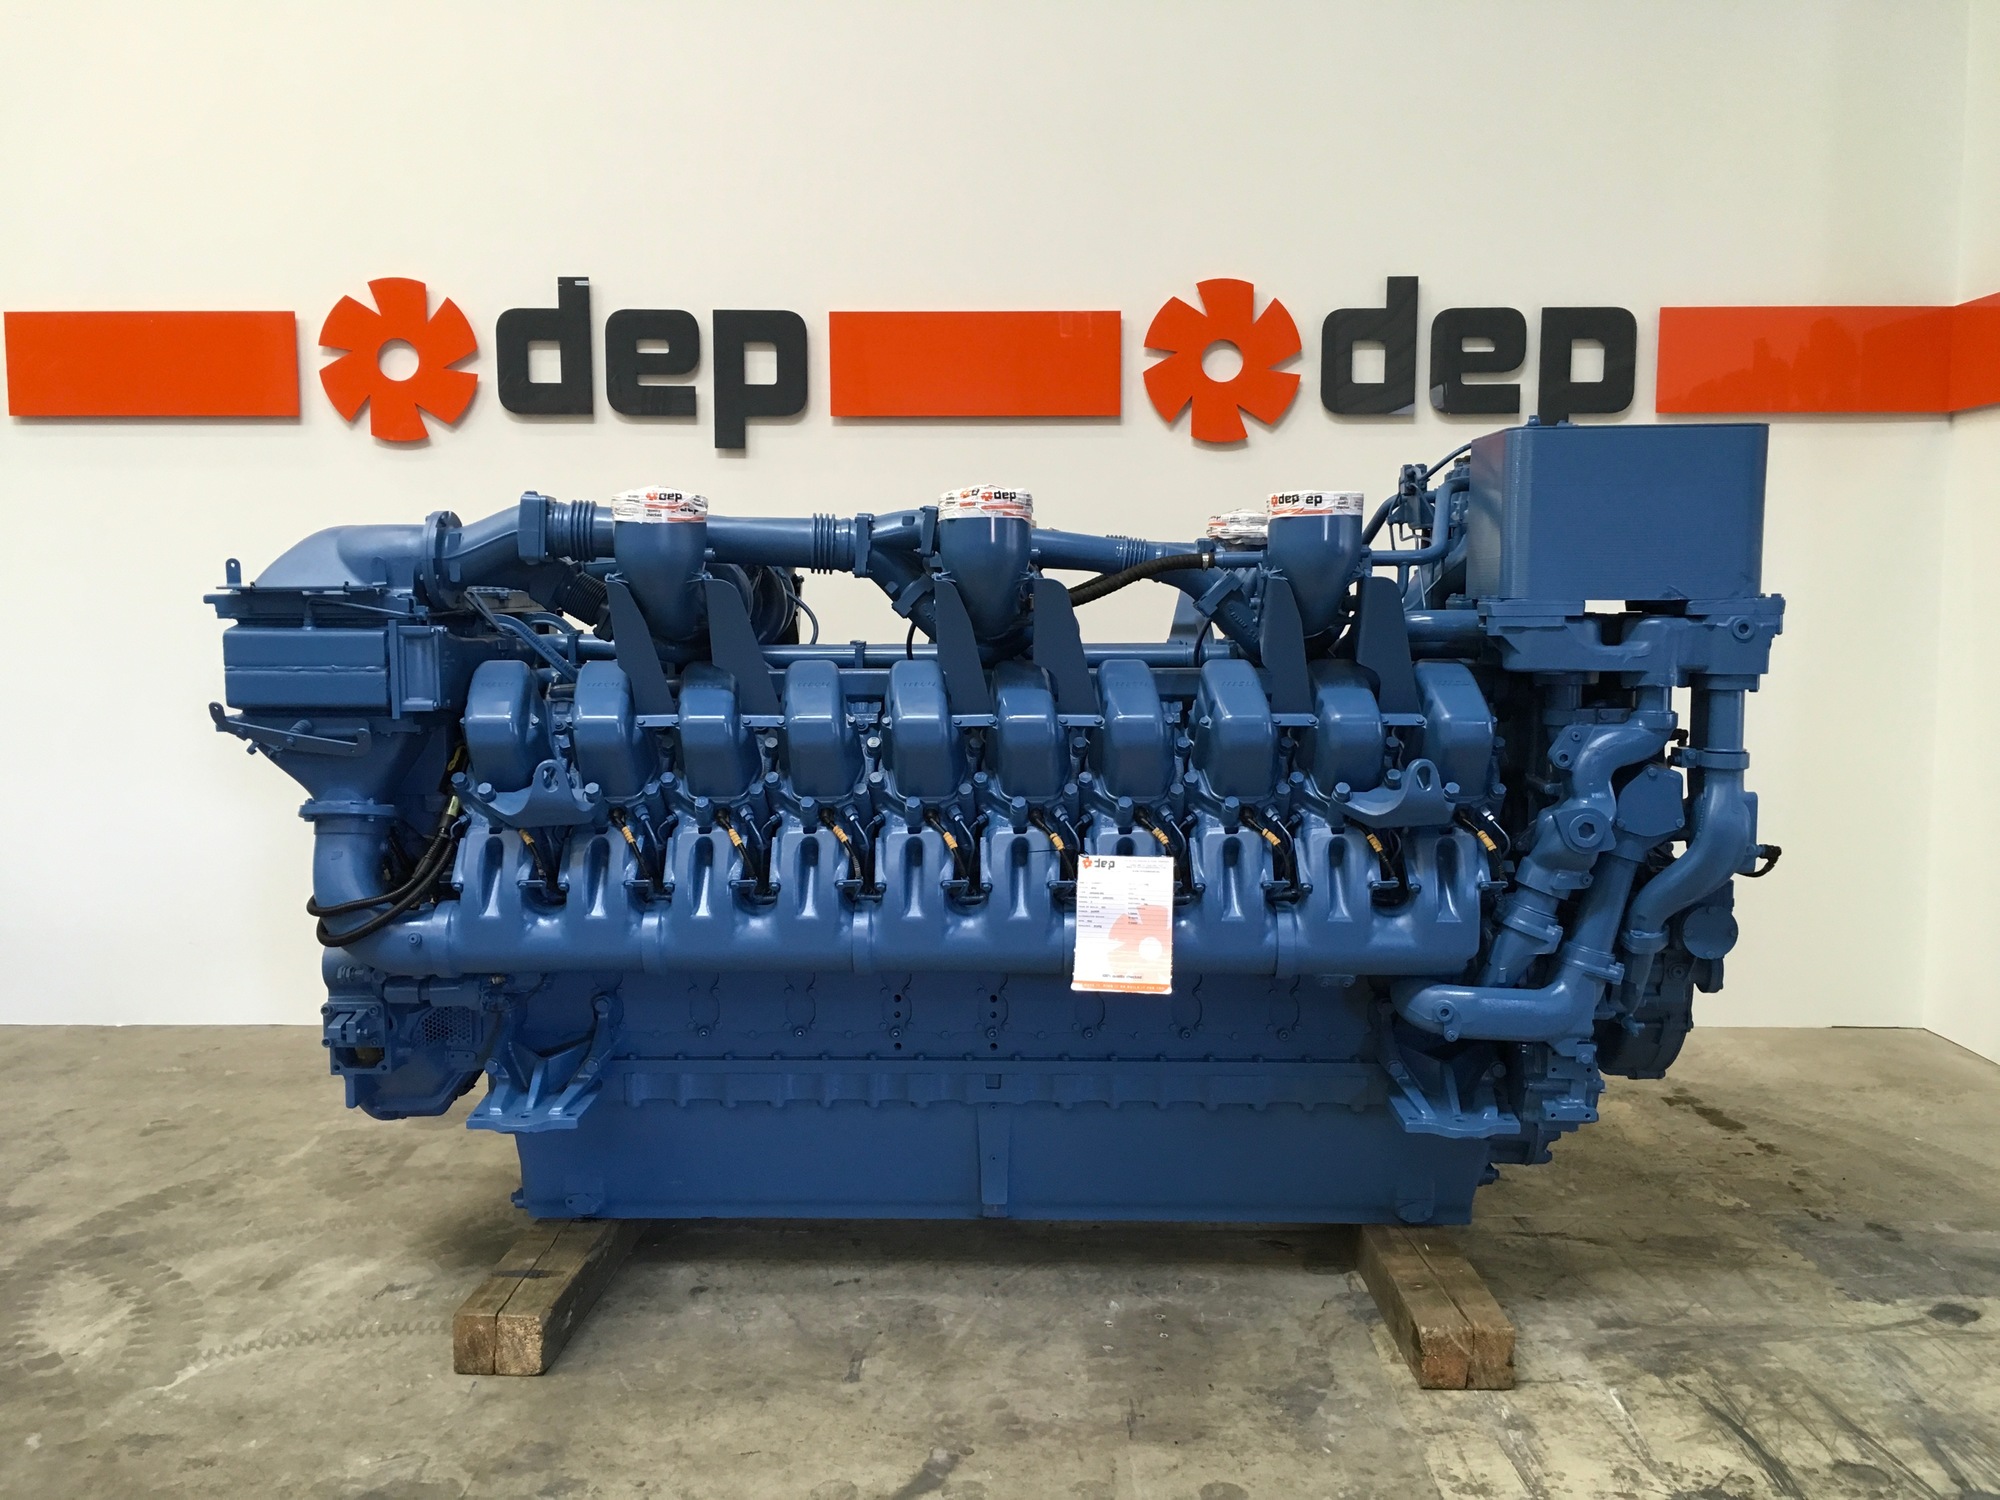 DUTCH ENGINES AND PUMPS undefined: صور 1